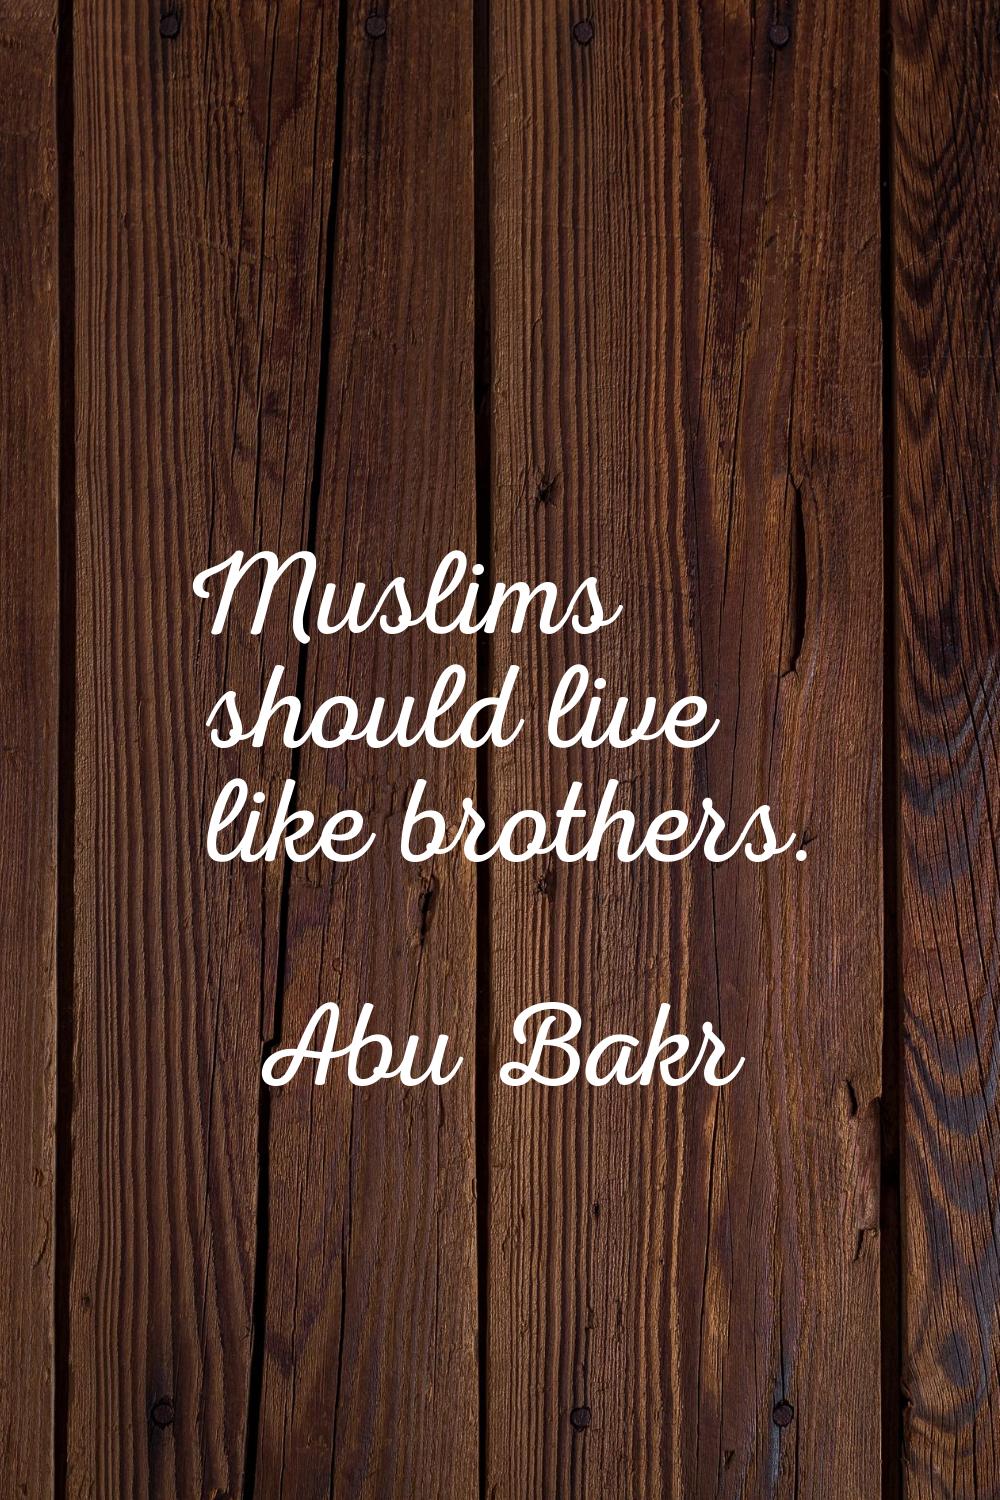 Muslims should live like brothers.